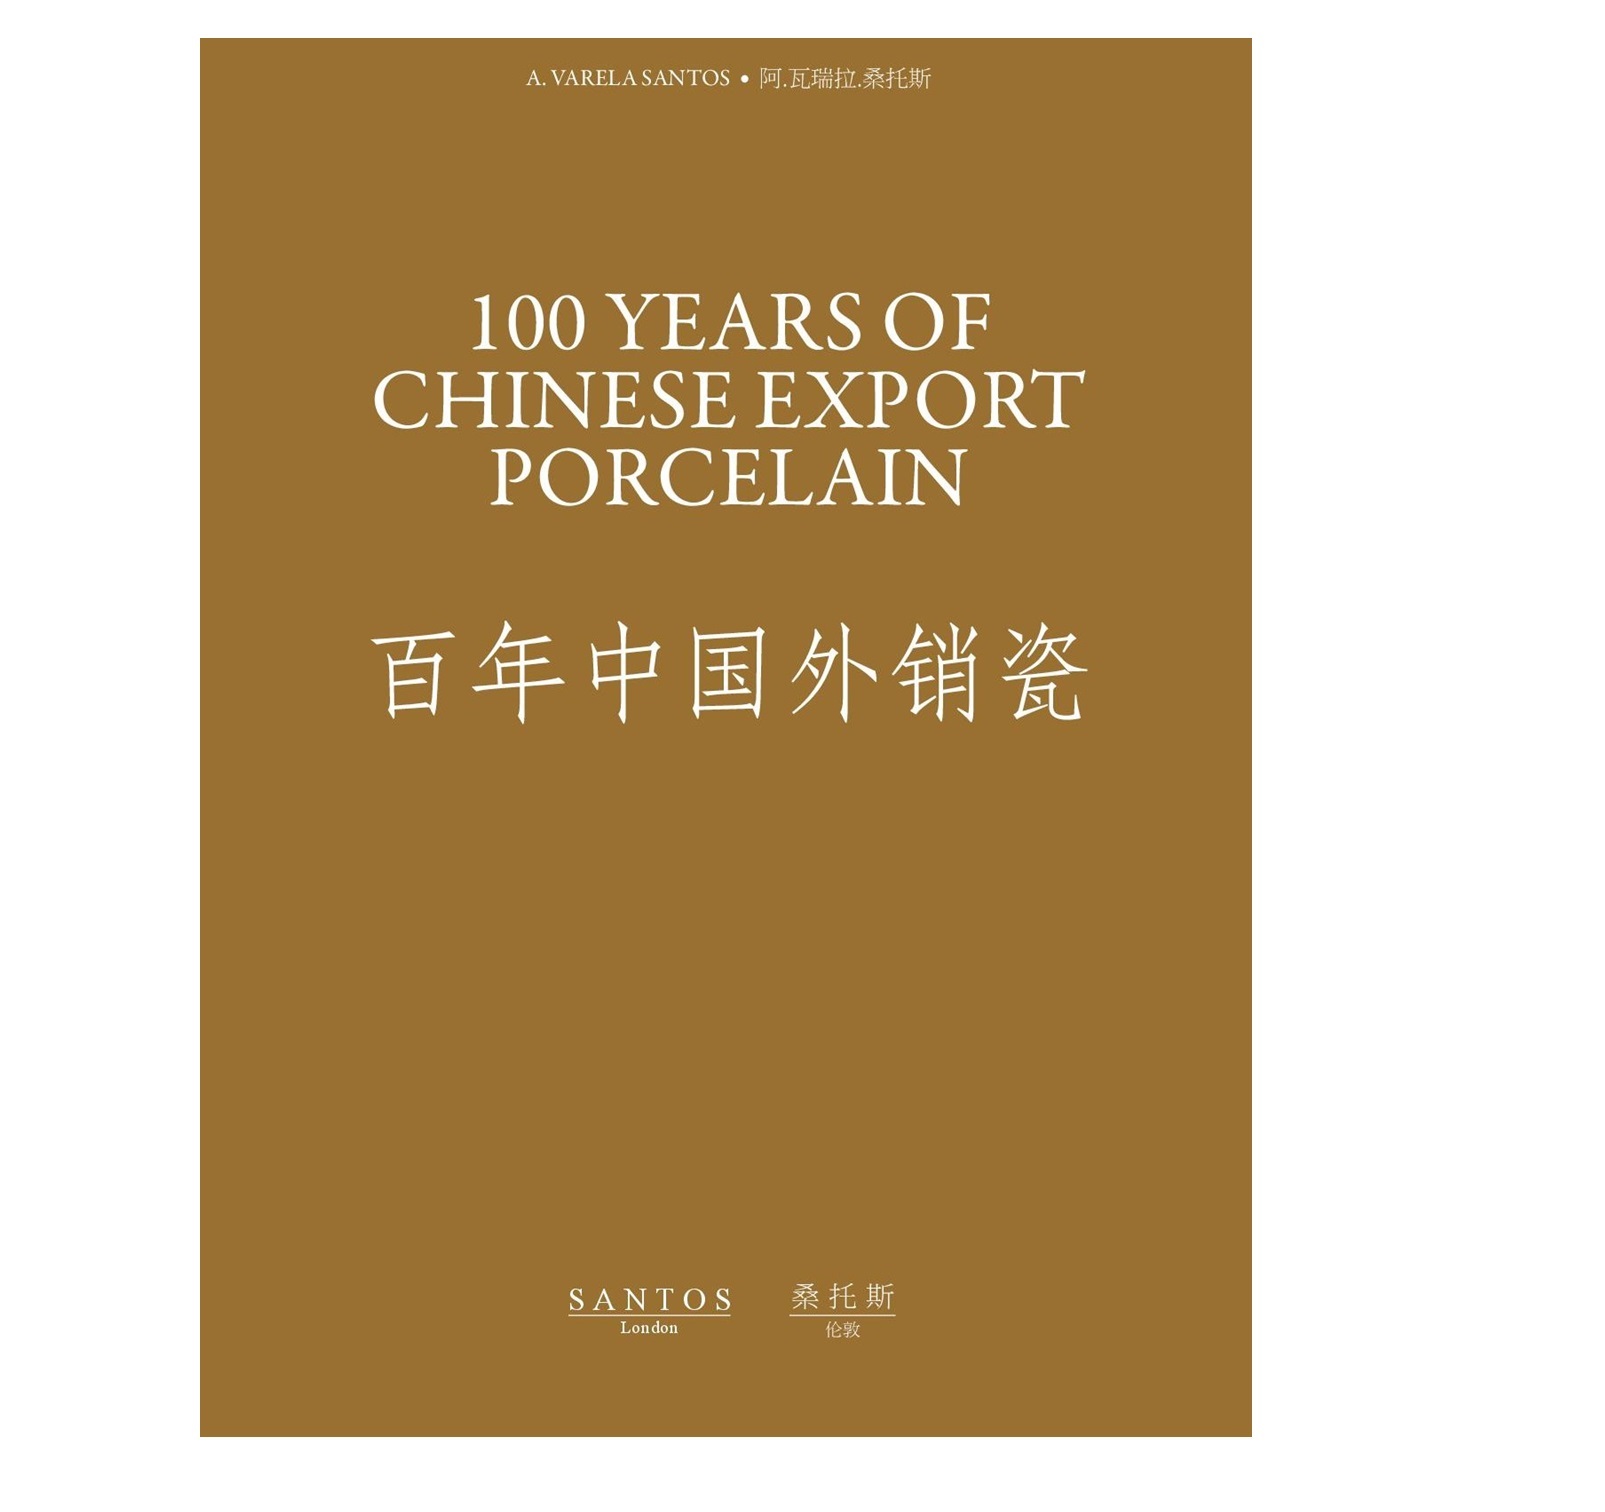 100 YEARS OF CHINESE EXPORT PORCELAIN (1650-1750)